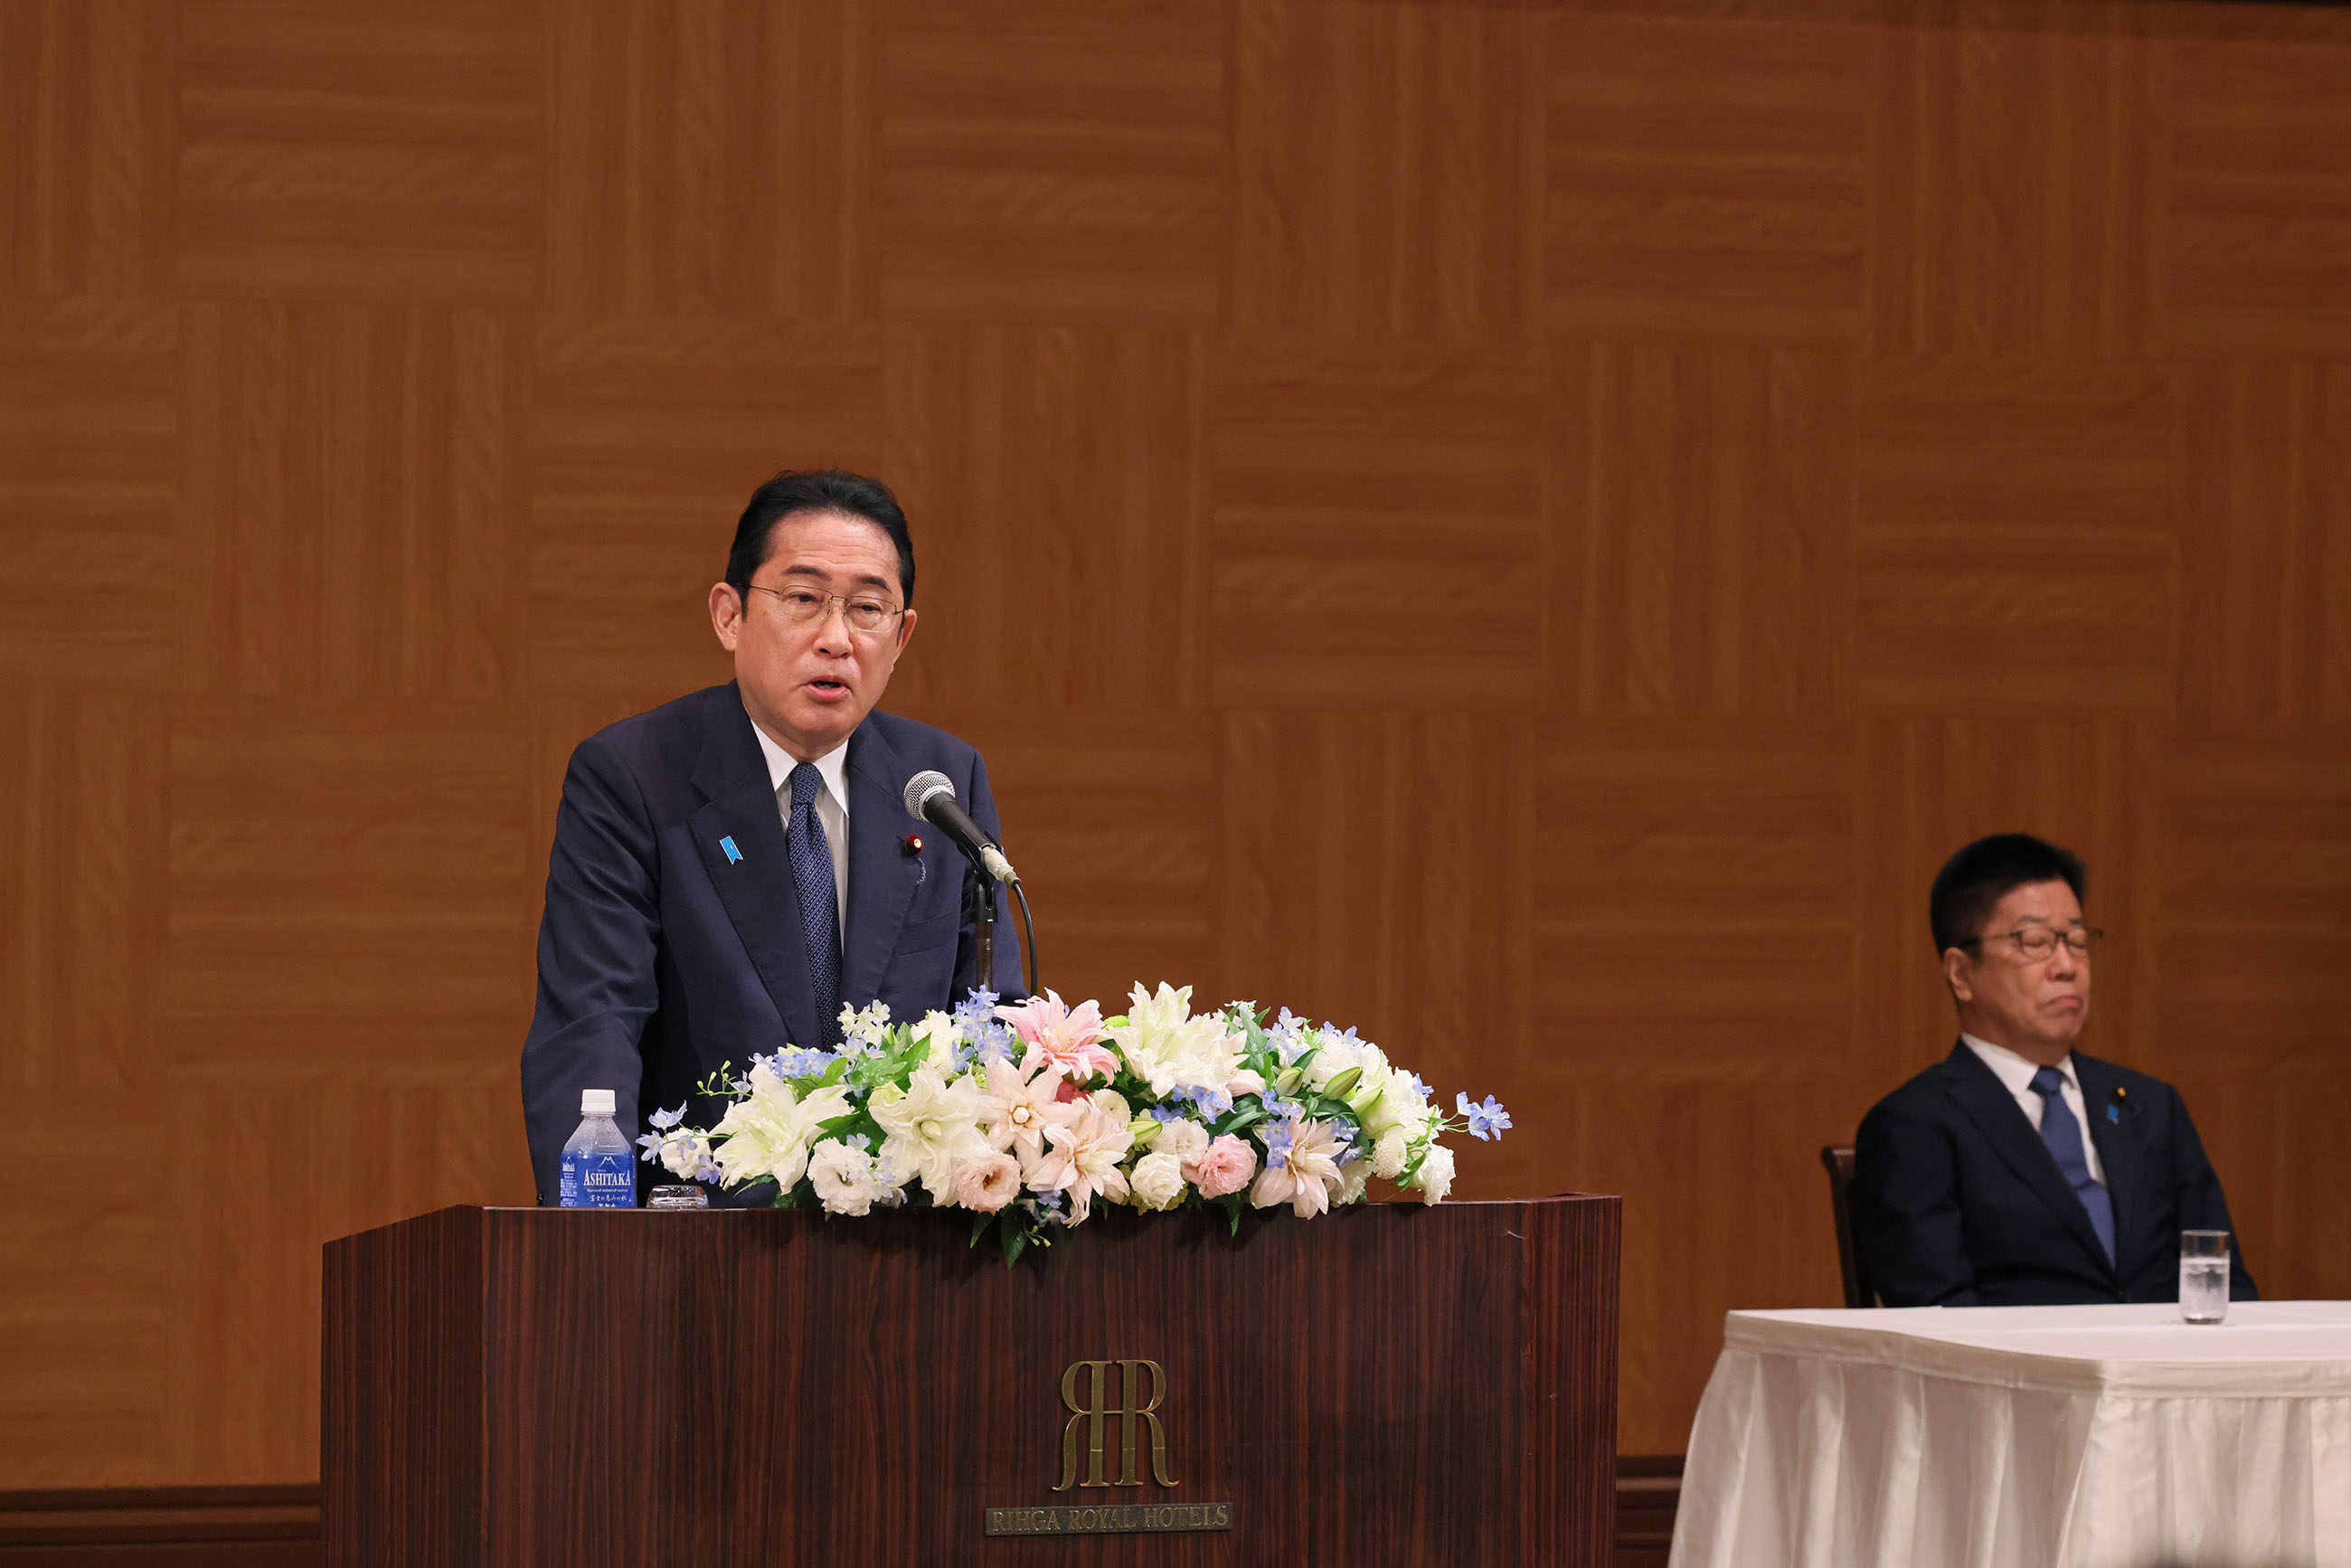 Prime Minister Kishida answering questions from the press (1)